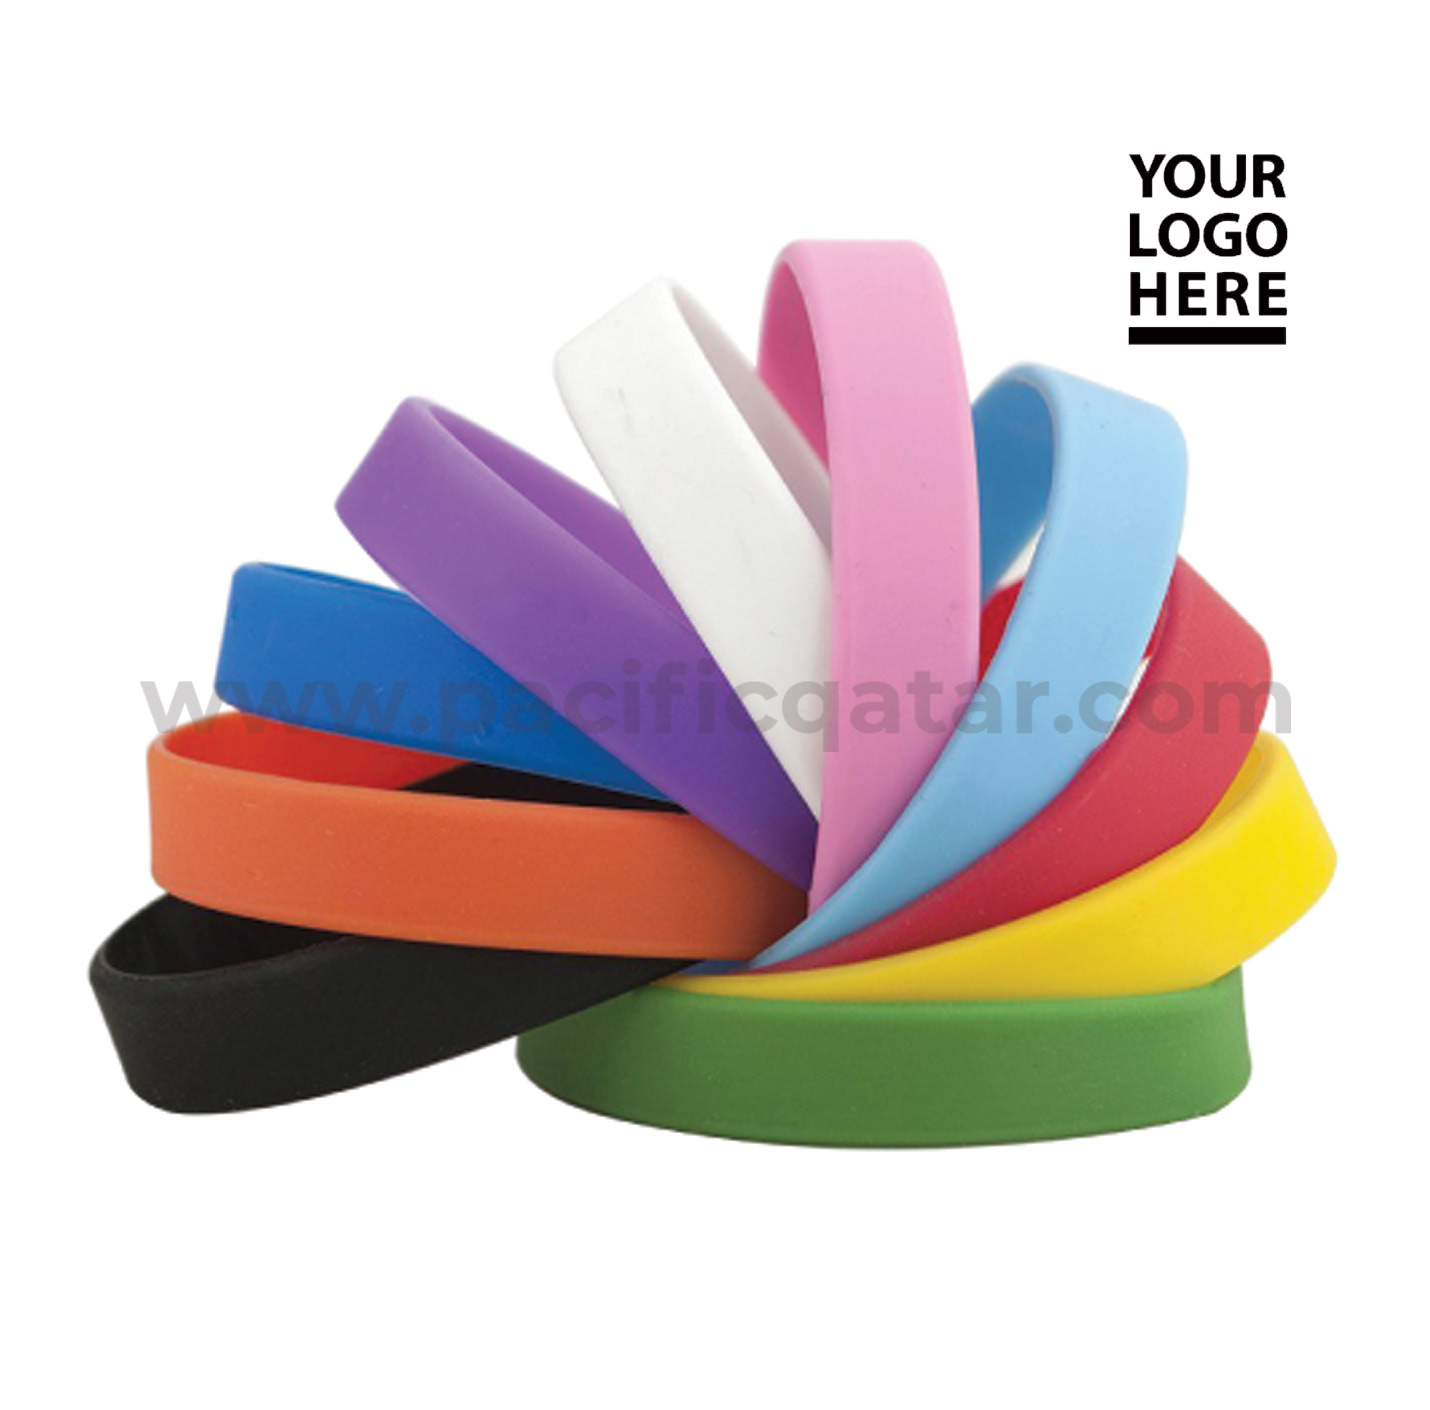 Silicon Wristbands in various color